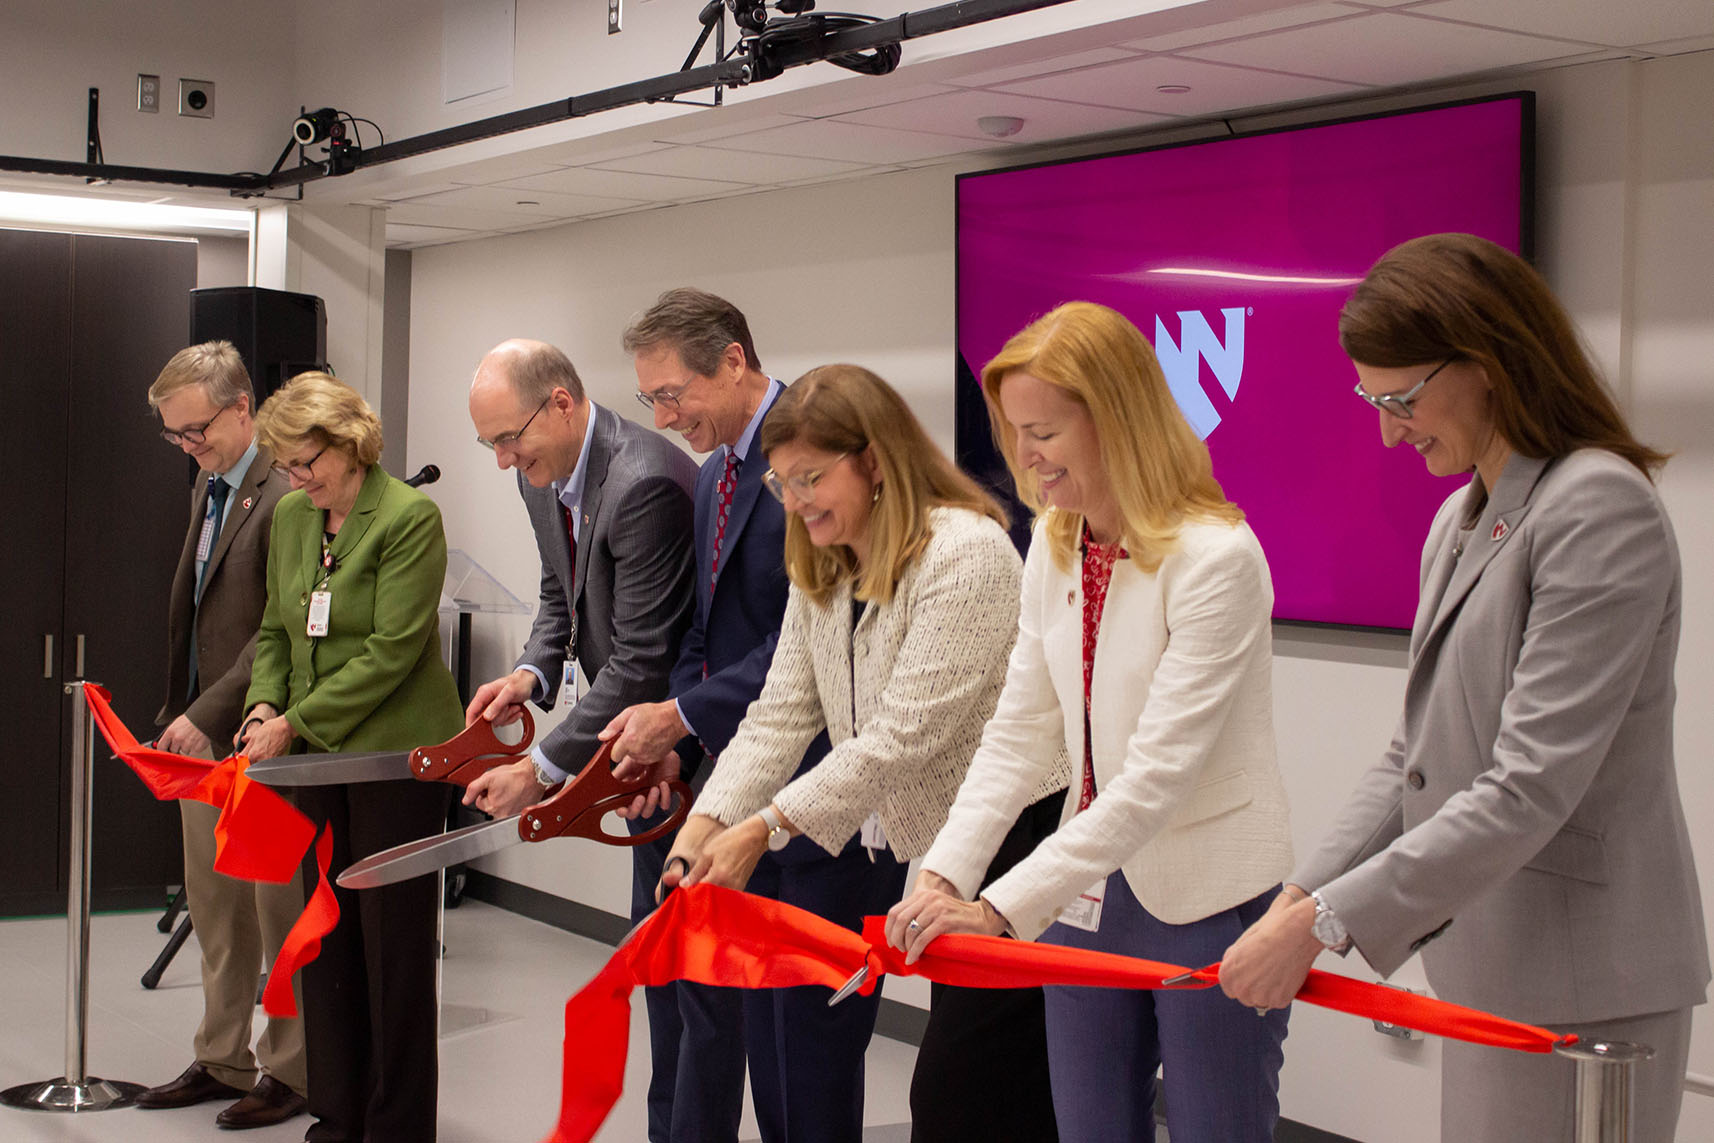 A ribbon cutting heralded the official opening of a newly renovated health and wellness clinical research lab open to collaborators across UNMC colleges and institutes&period; From left&colon; Russell McCulloh&comma; MD&comma; Jennifer Larsen&comma; MD&comma; Kenneth Bayles&comma; PhD&comma; Kyle Meyer&comma; PhD&comma; Laura Bilek&comma; PhD&comma; Yvonne Golightly&comma; PhD&comma; and Betsy Becker&comma; DPT&comma; PhD